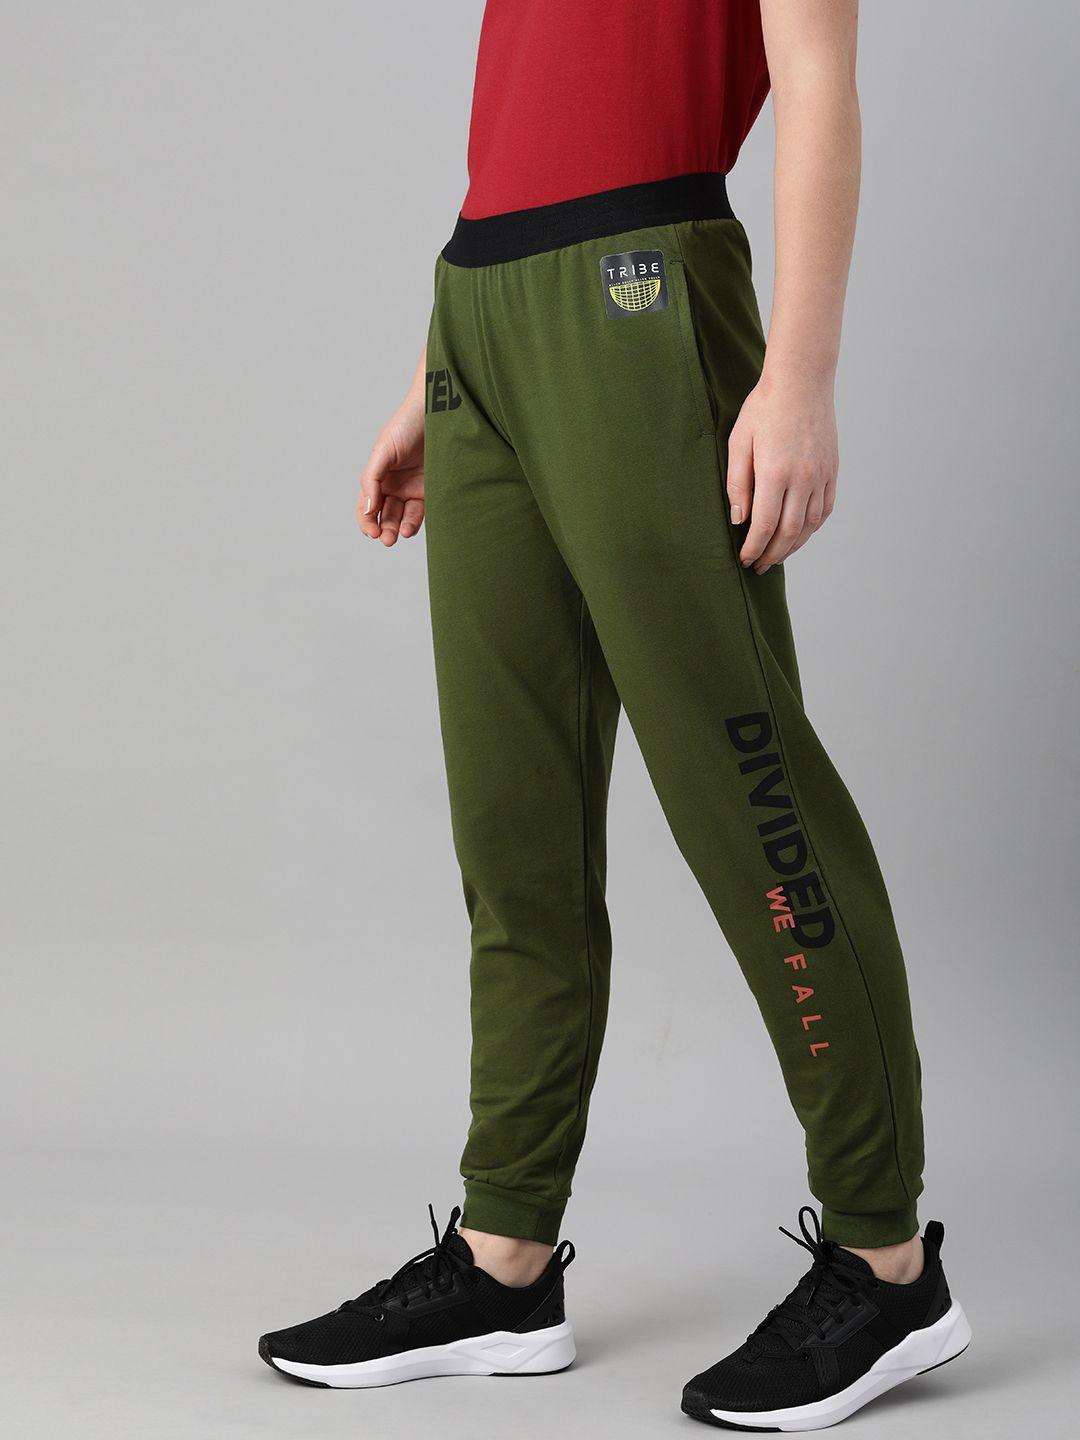 allen-solly-tribe-women-olive-green-&-black-regular-fit-printed-joggers